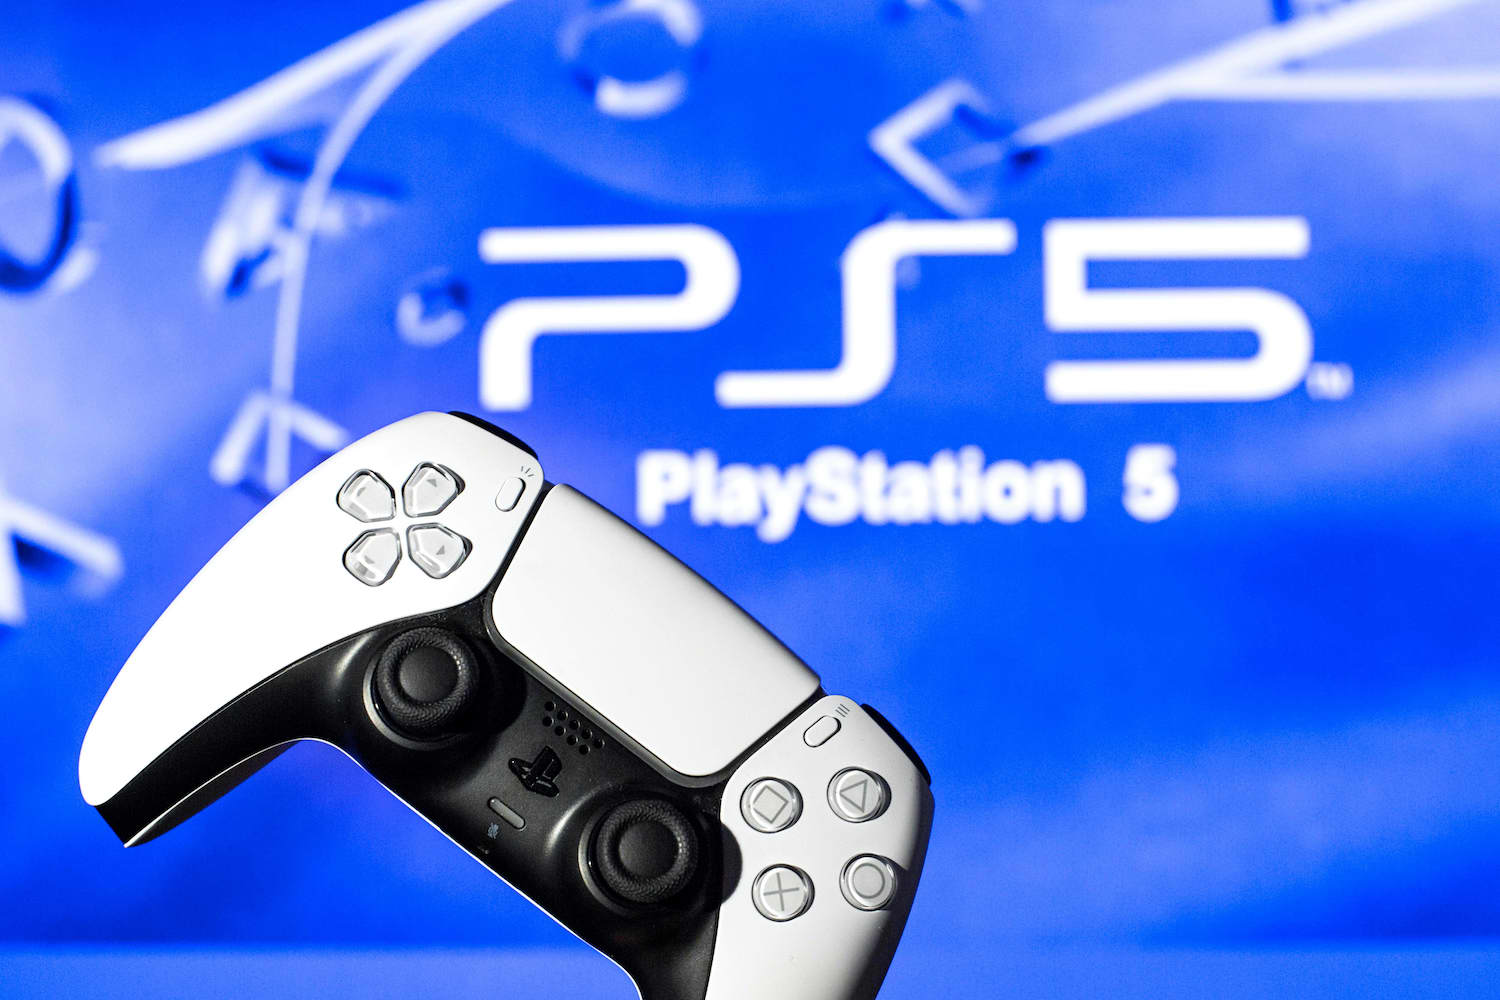 Analysts suggest that Sony will release a Pro version of the PlayStation 5 this year